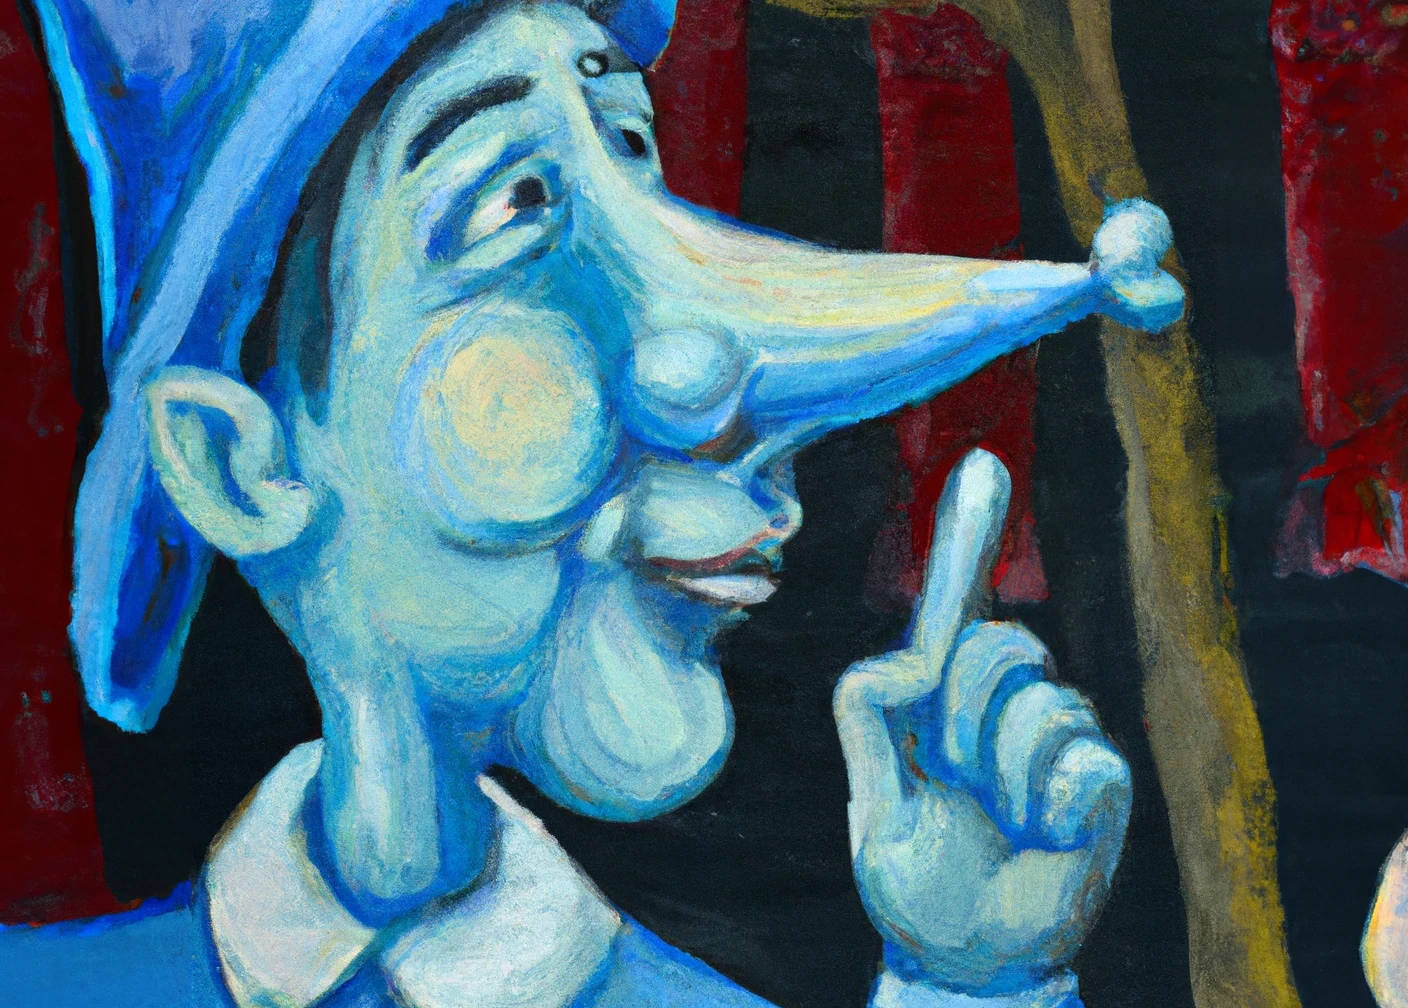 A blue-colored jester, with a long nose like pinocchio lying.